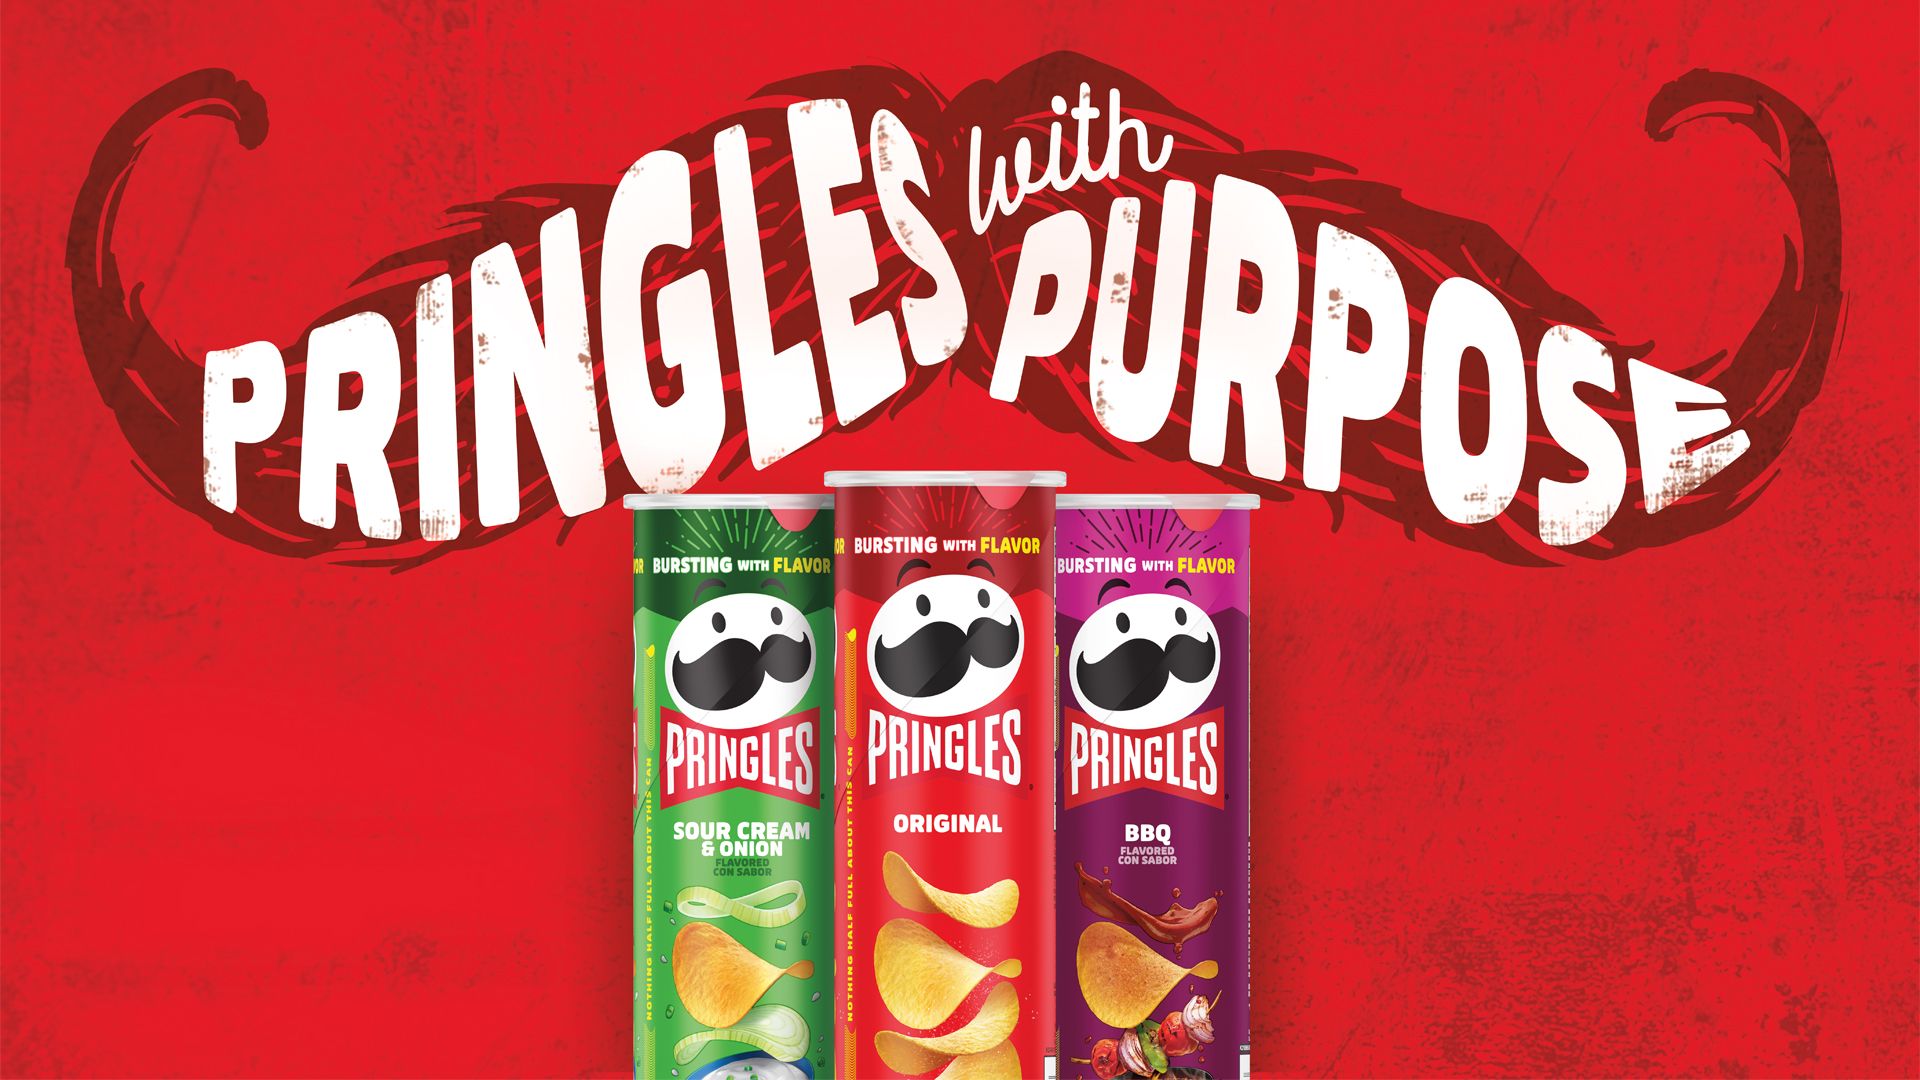 Text on top of a large red moustache reads "Pringles with Purpose", with 3 cans of Pringles below